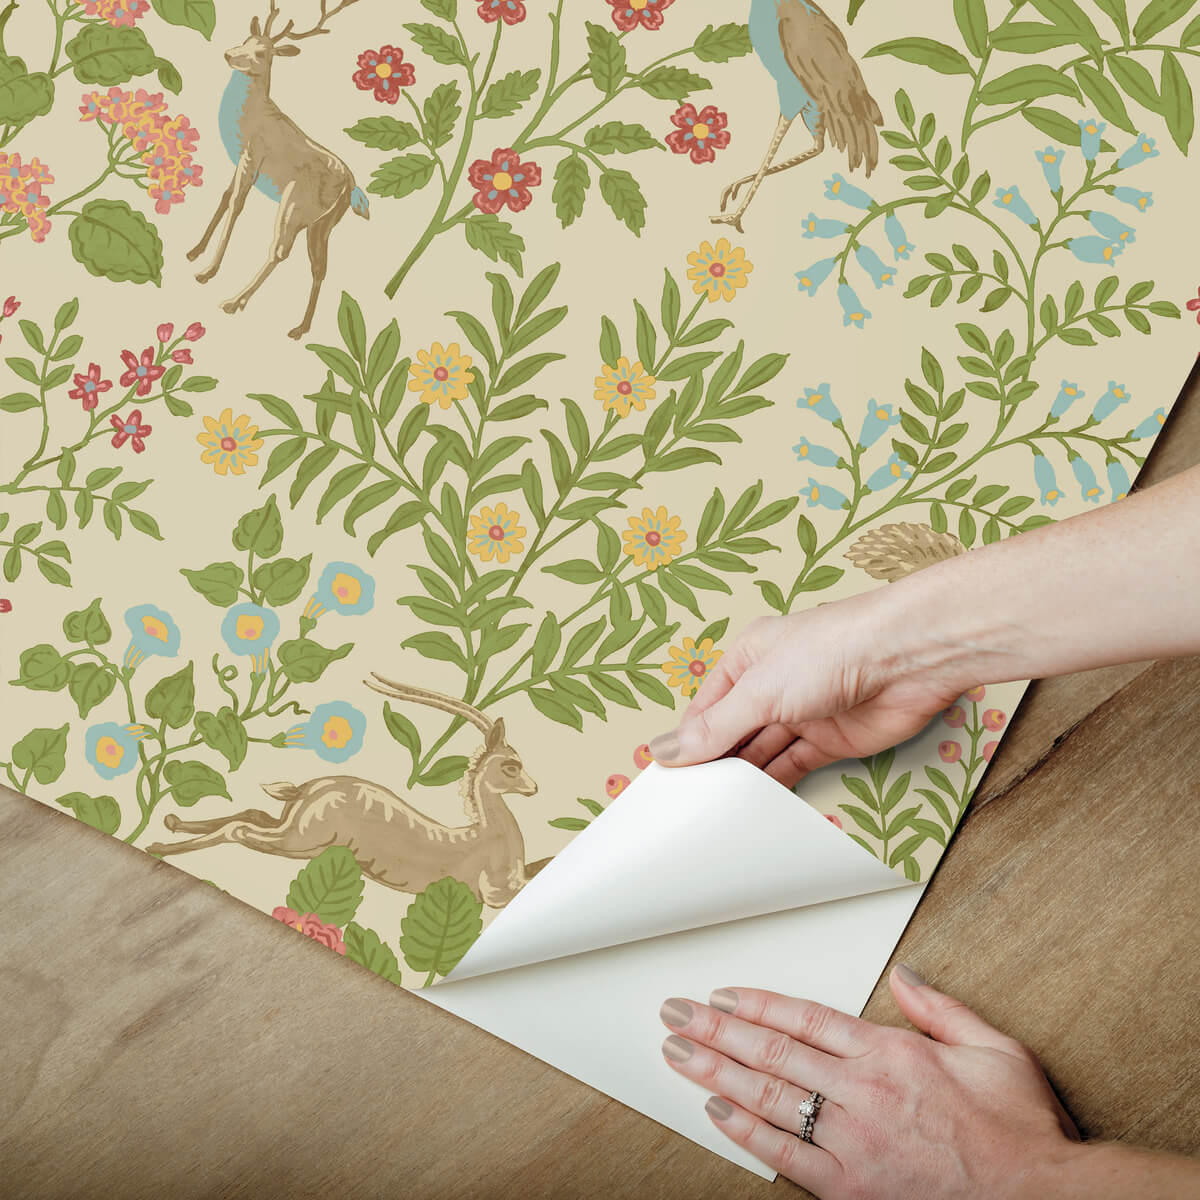 Erin Napier Releases New Wallpaper Collection with York Wallcoverings